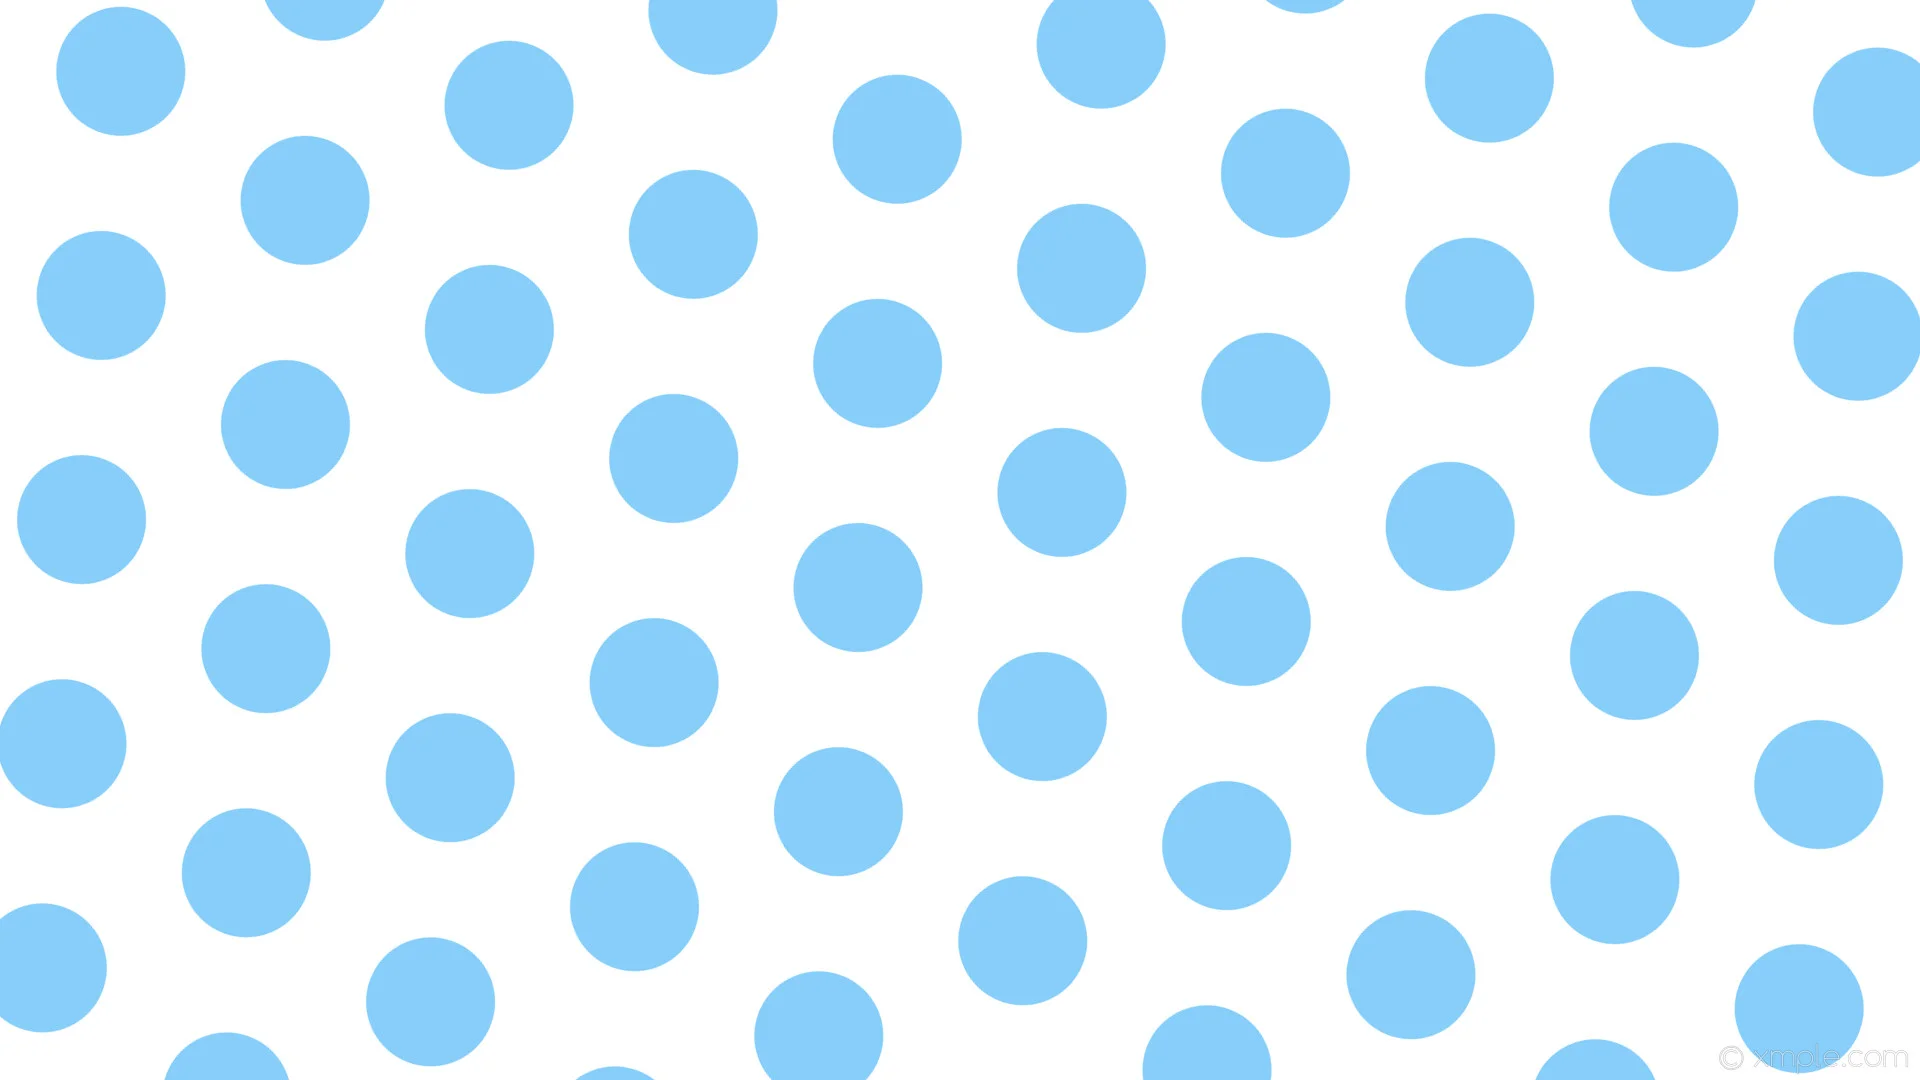 Light Blue Background With White Polka Dots Koplo Png